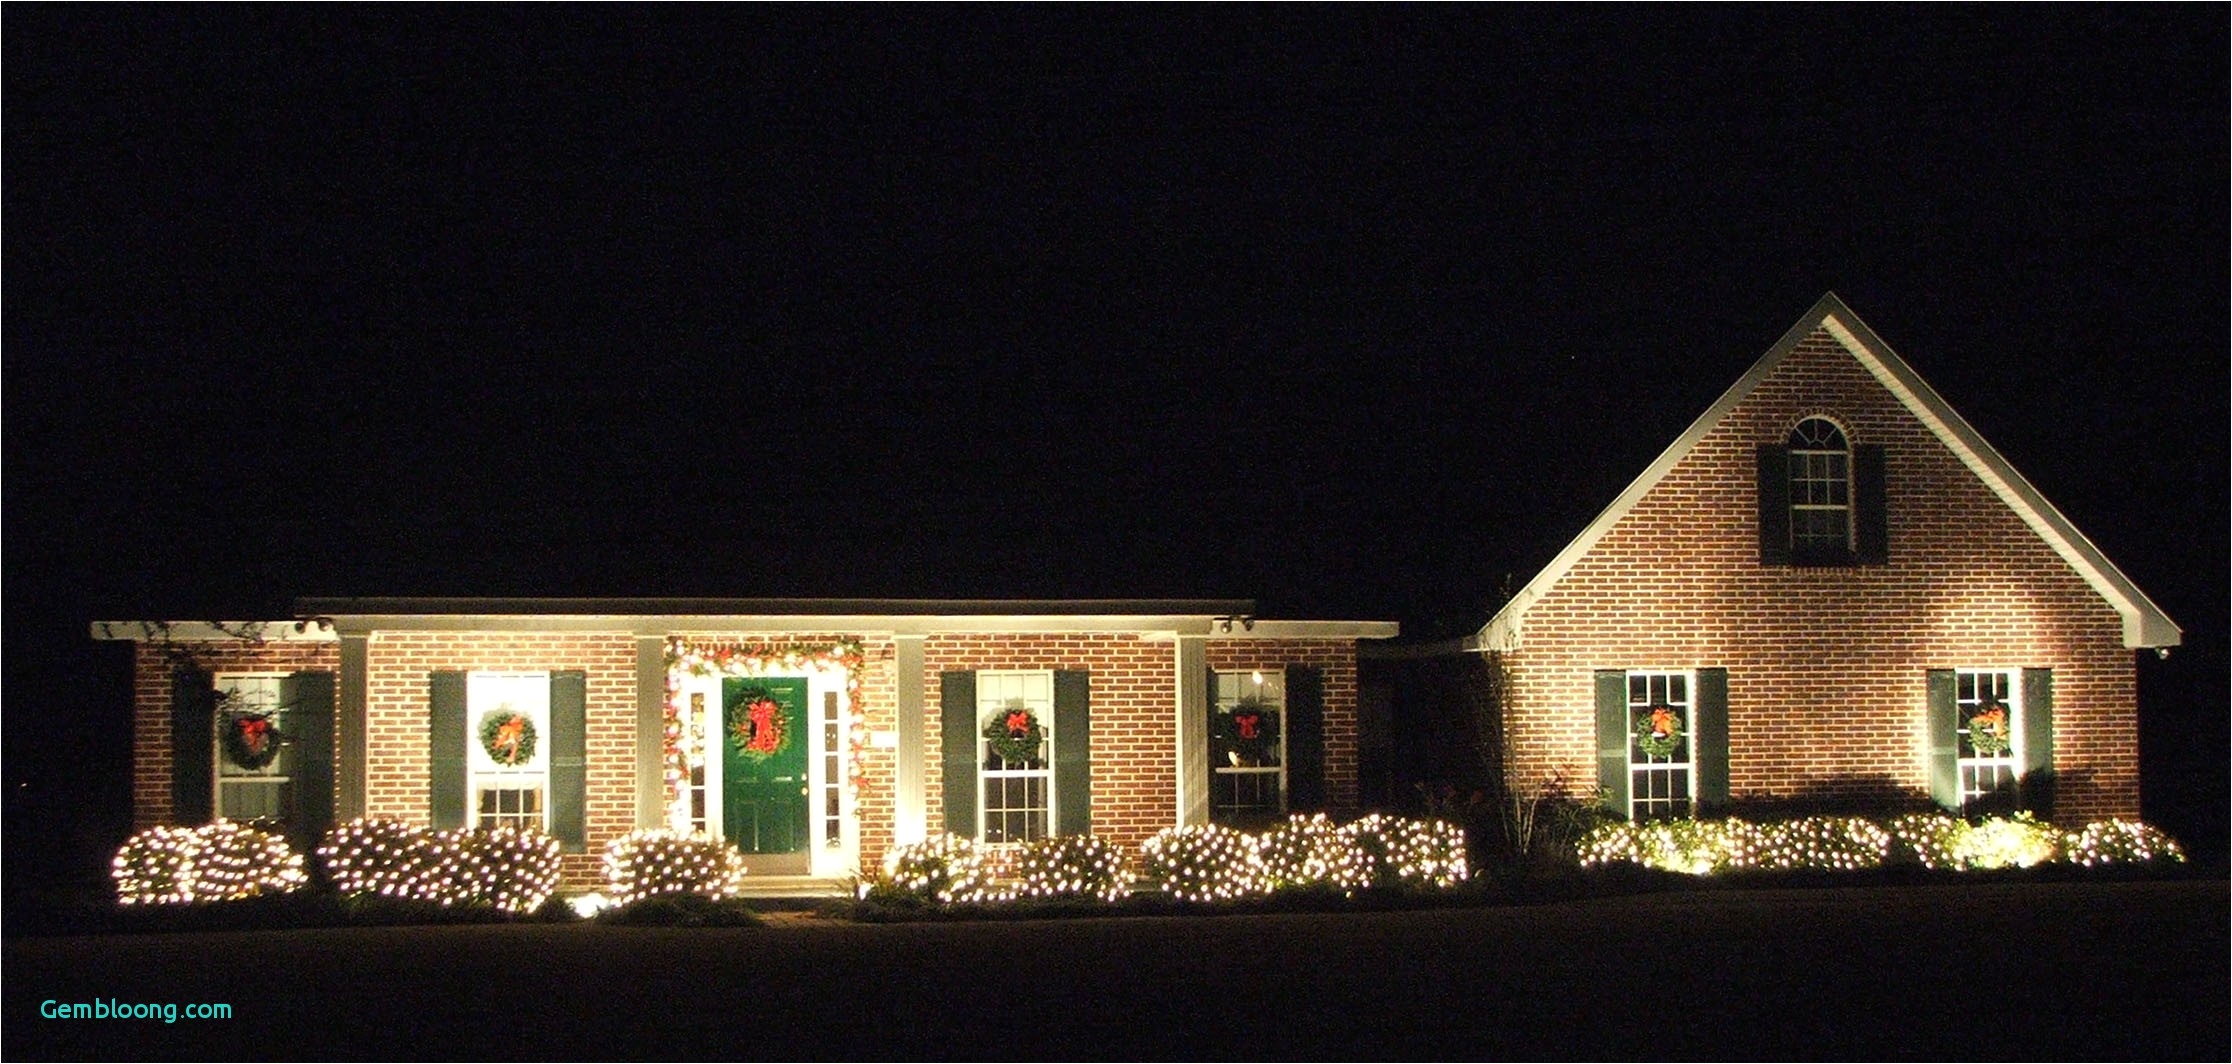 battery operated christmas lights lowes lovely christmas decorating tips lowes creative ideas youtube clipgoo of 50